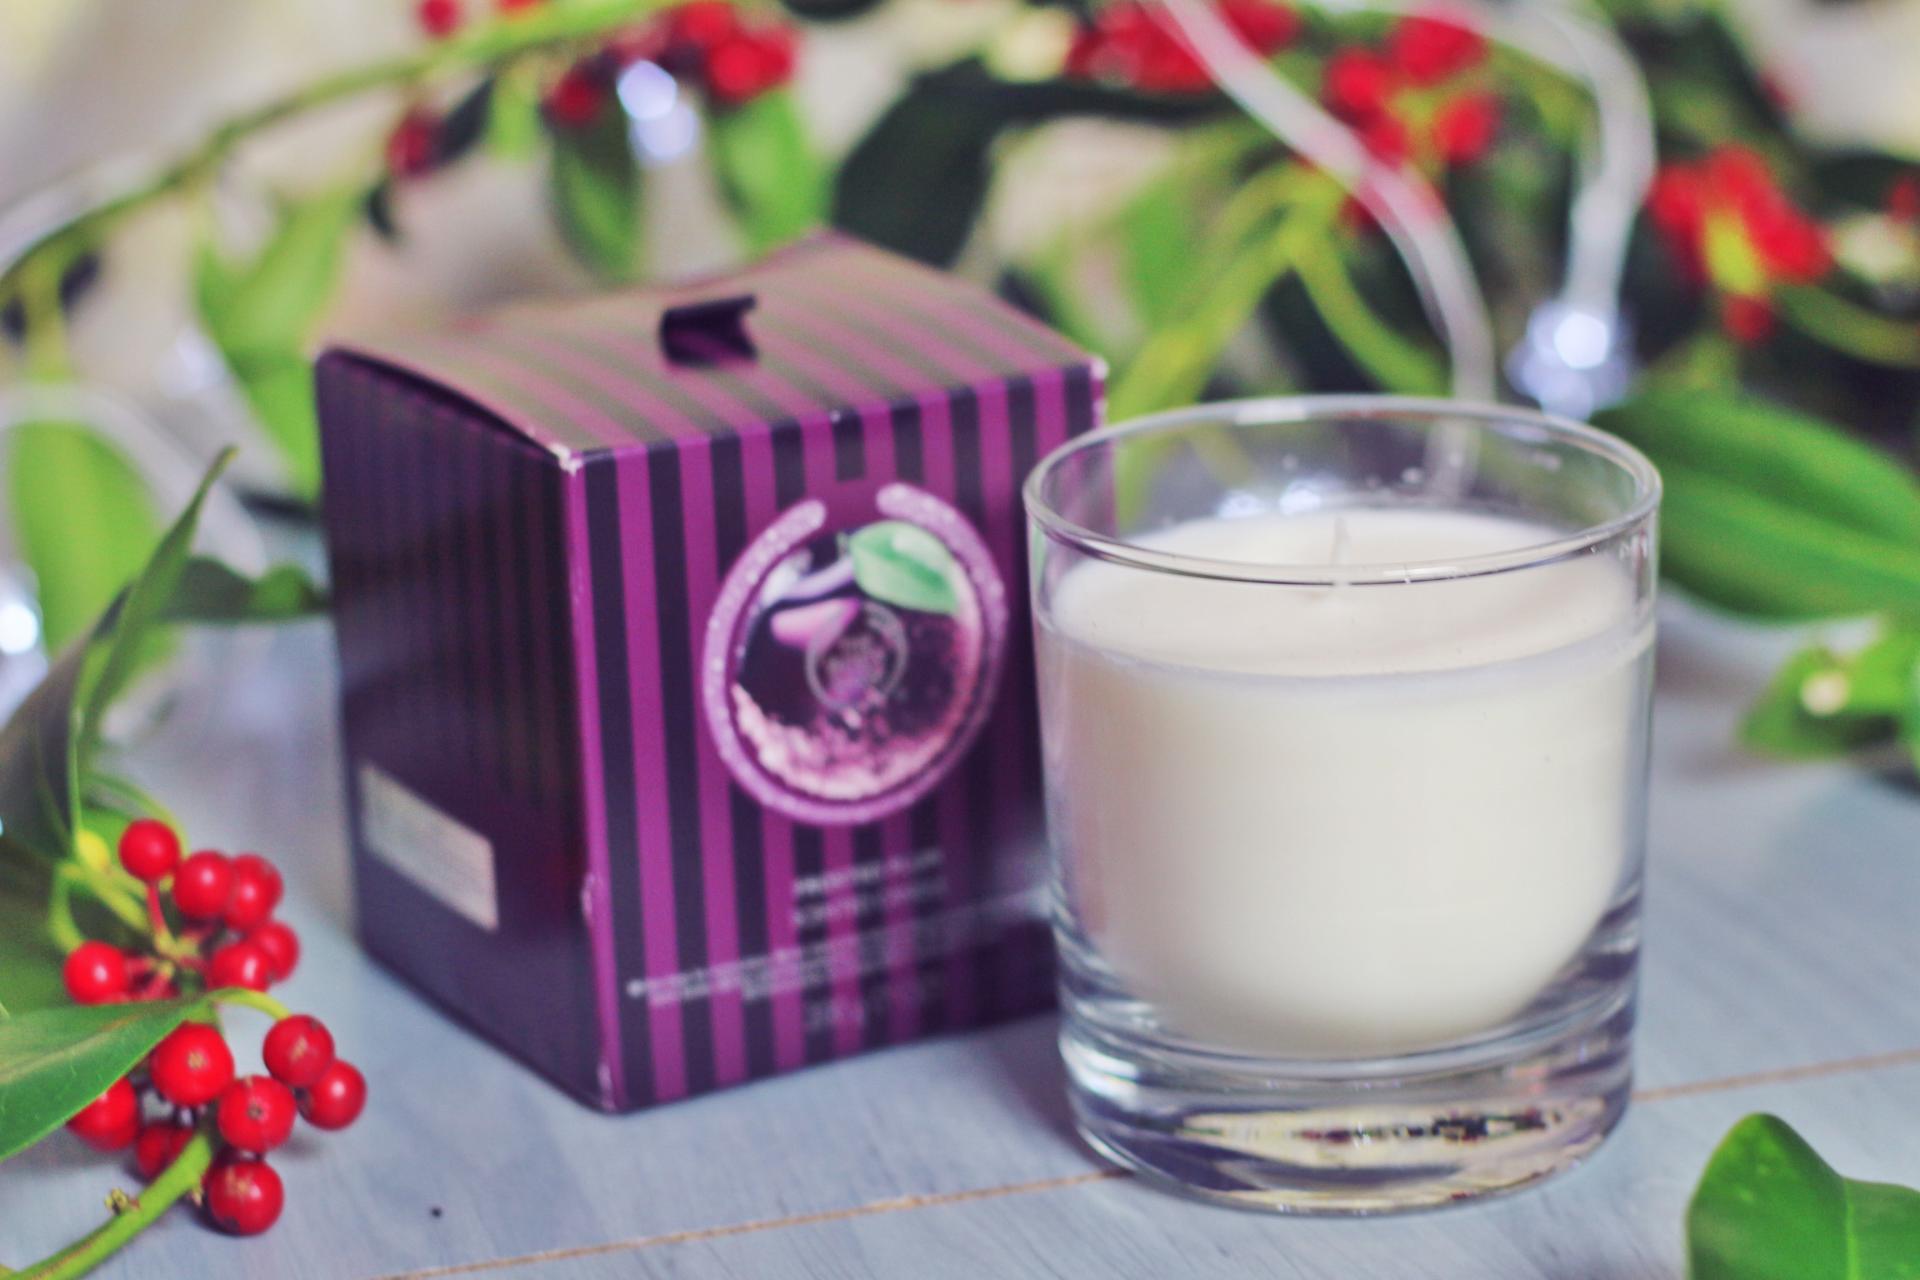 The body shop frosted plum candle